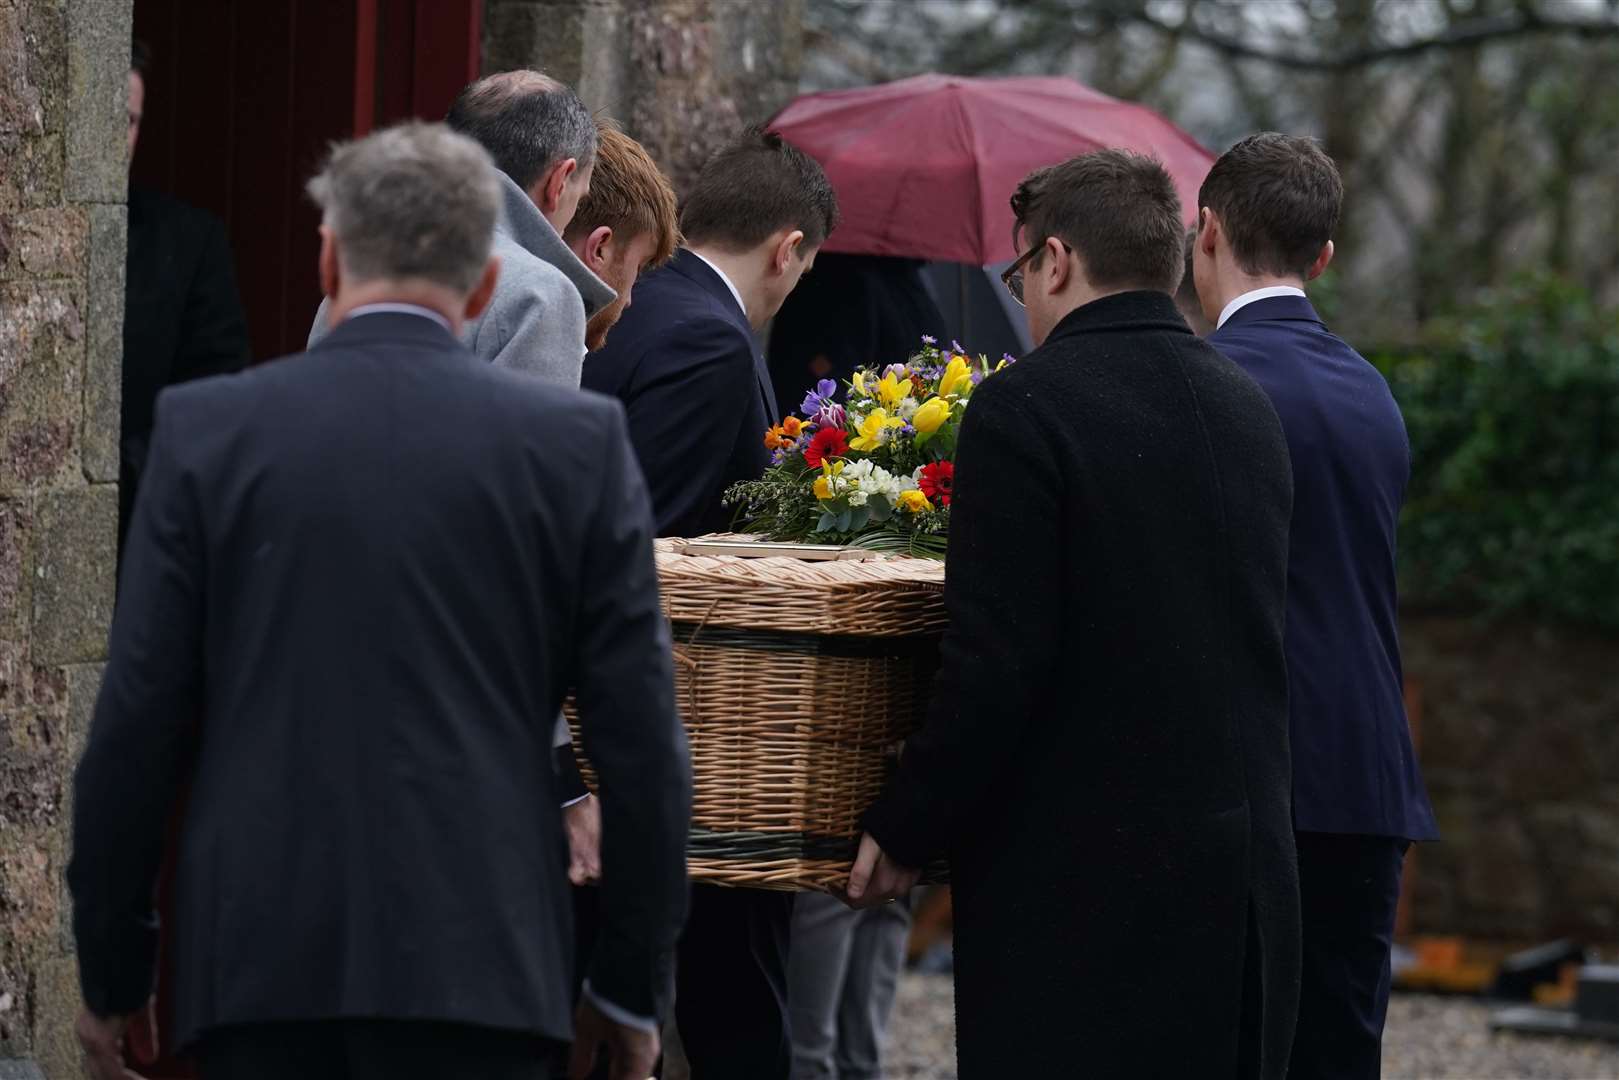 Pall bearers carry the casket into St Ibar’s Church in Castlebridge, Co Wexford (Brian Lawless/PA)